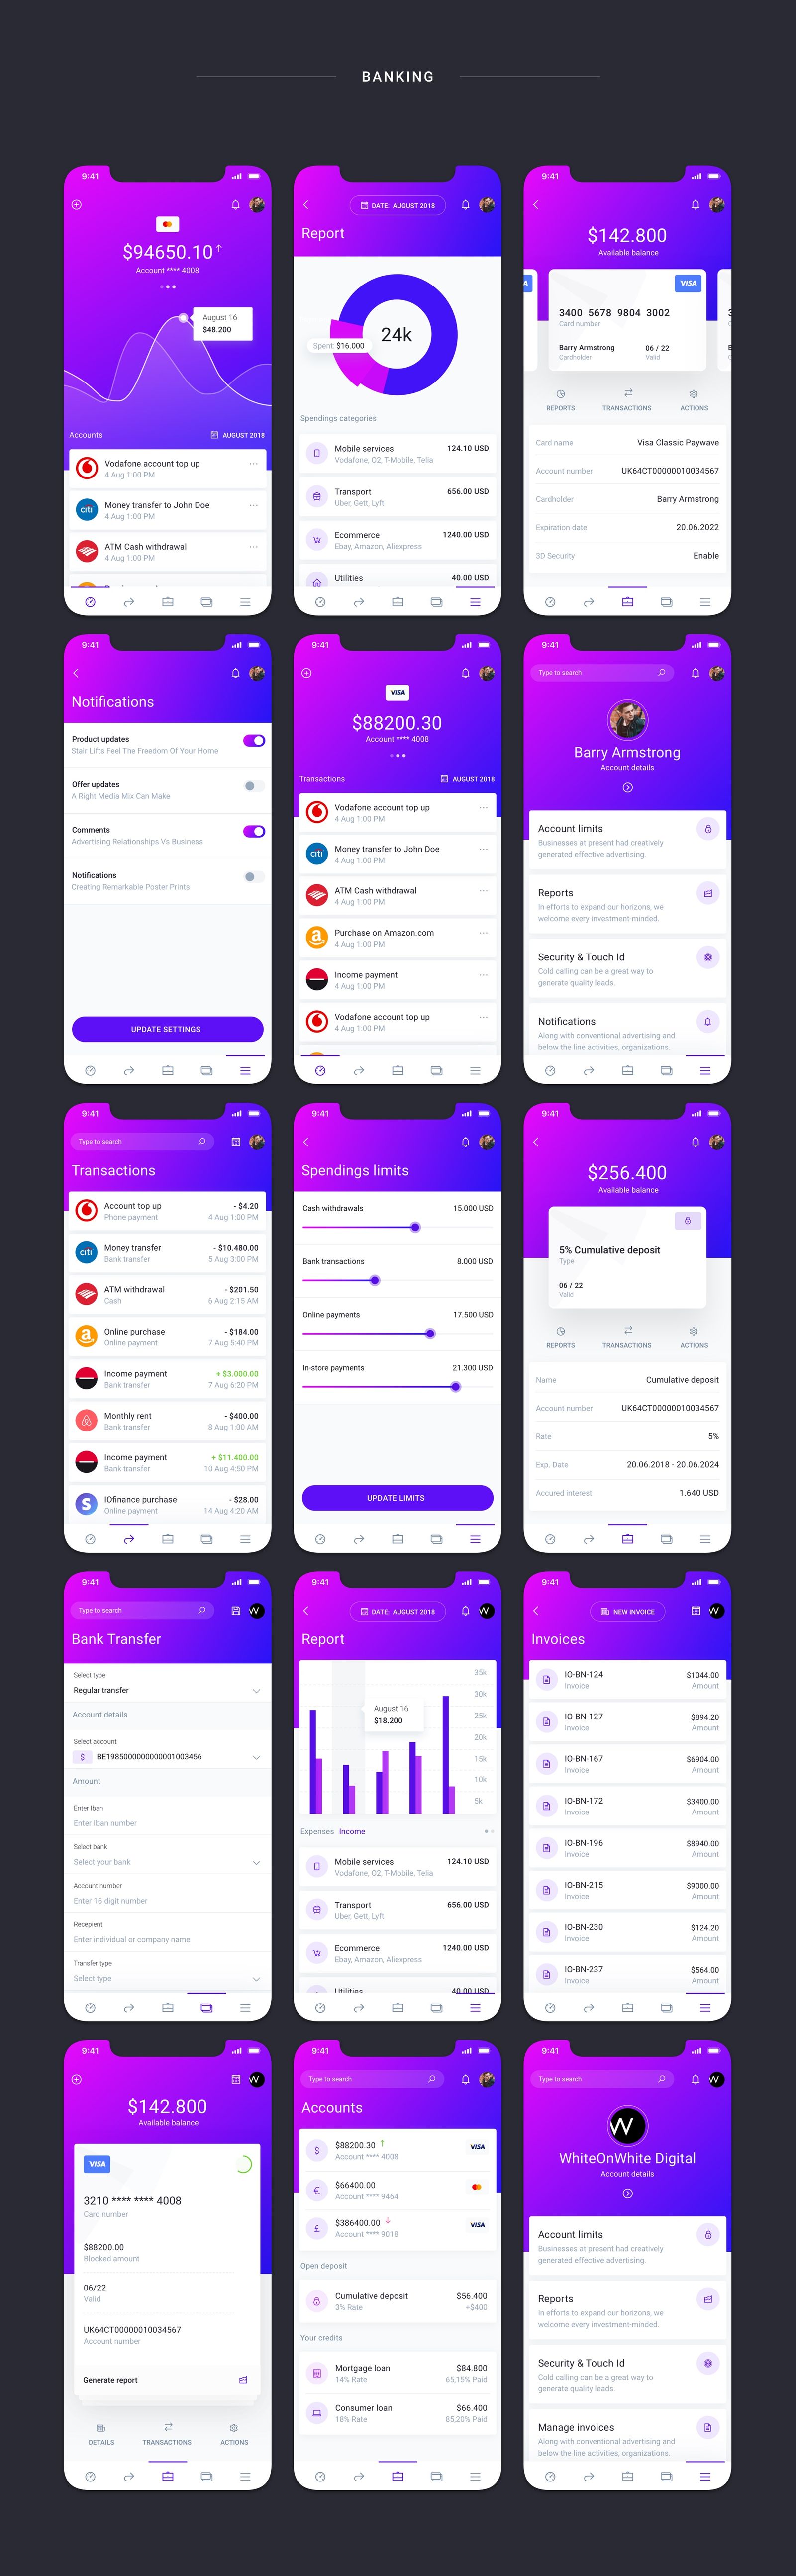 IOWalley - Mobile UI kit for Banking Apps & Crypto Wallets - 9